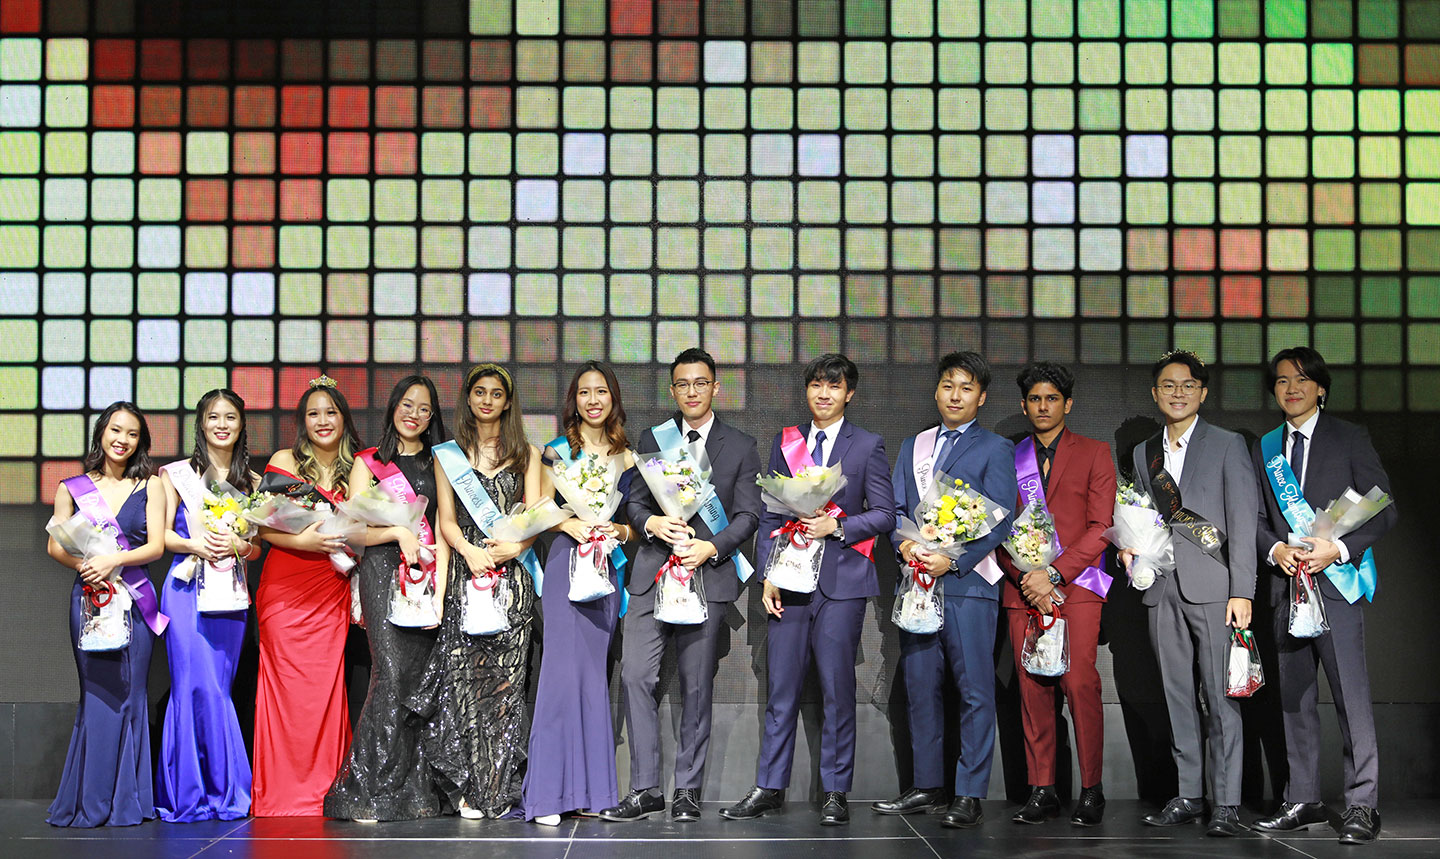 Photo of a group of students standing on the stage in a university pageant contest.